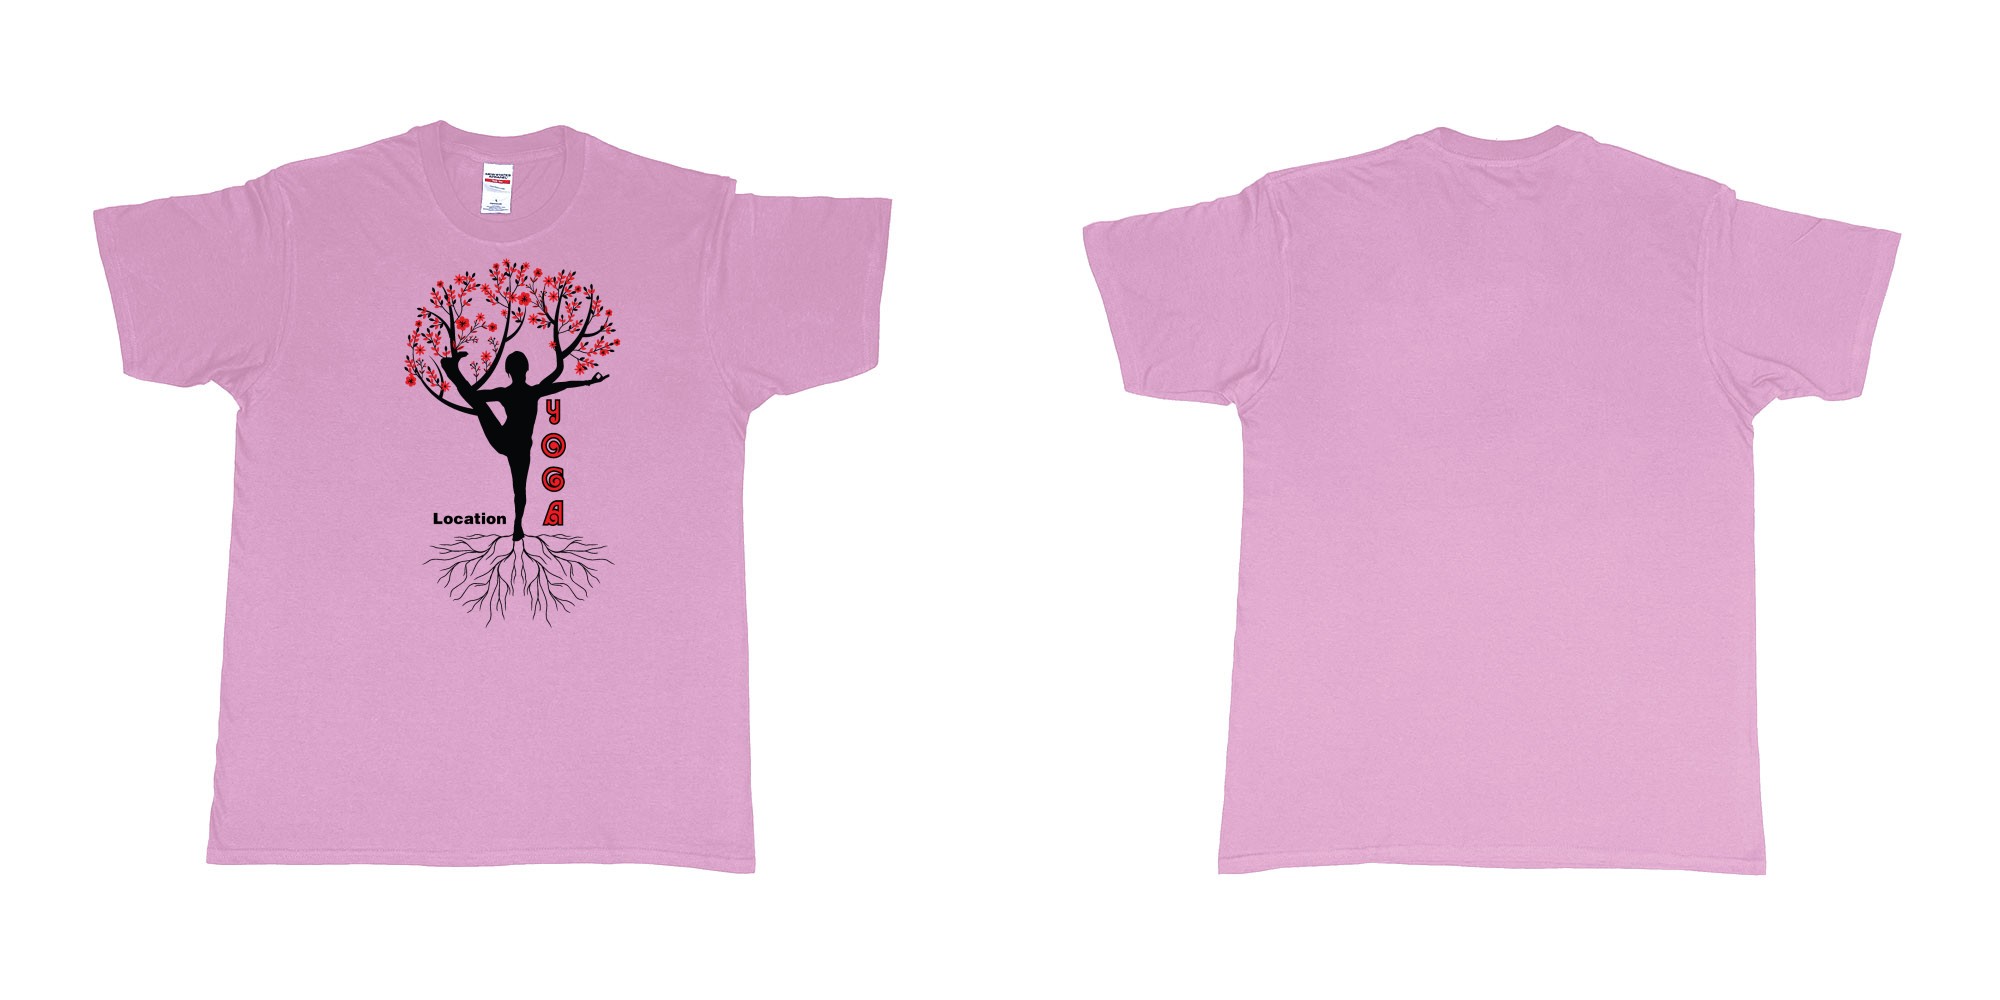 Custom tshirt design yoga tree of life is blooming own logo location design in fabric color light-pink choice your own text made in Bali by The Pirate Way